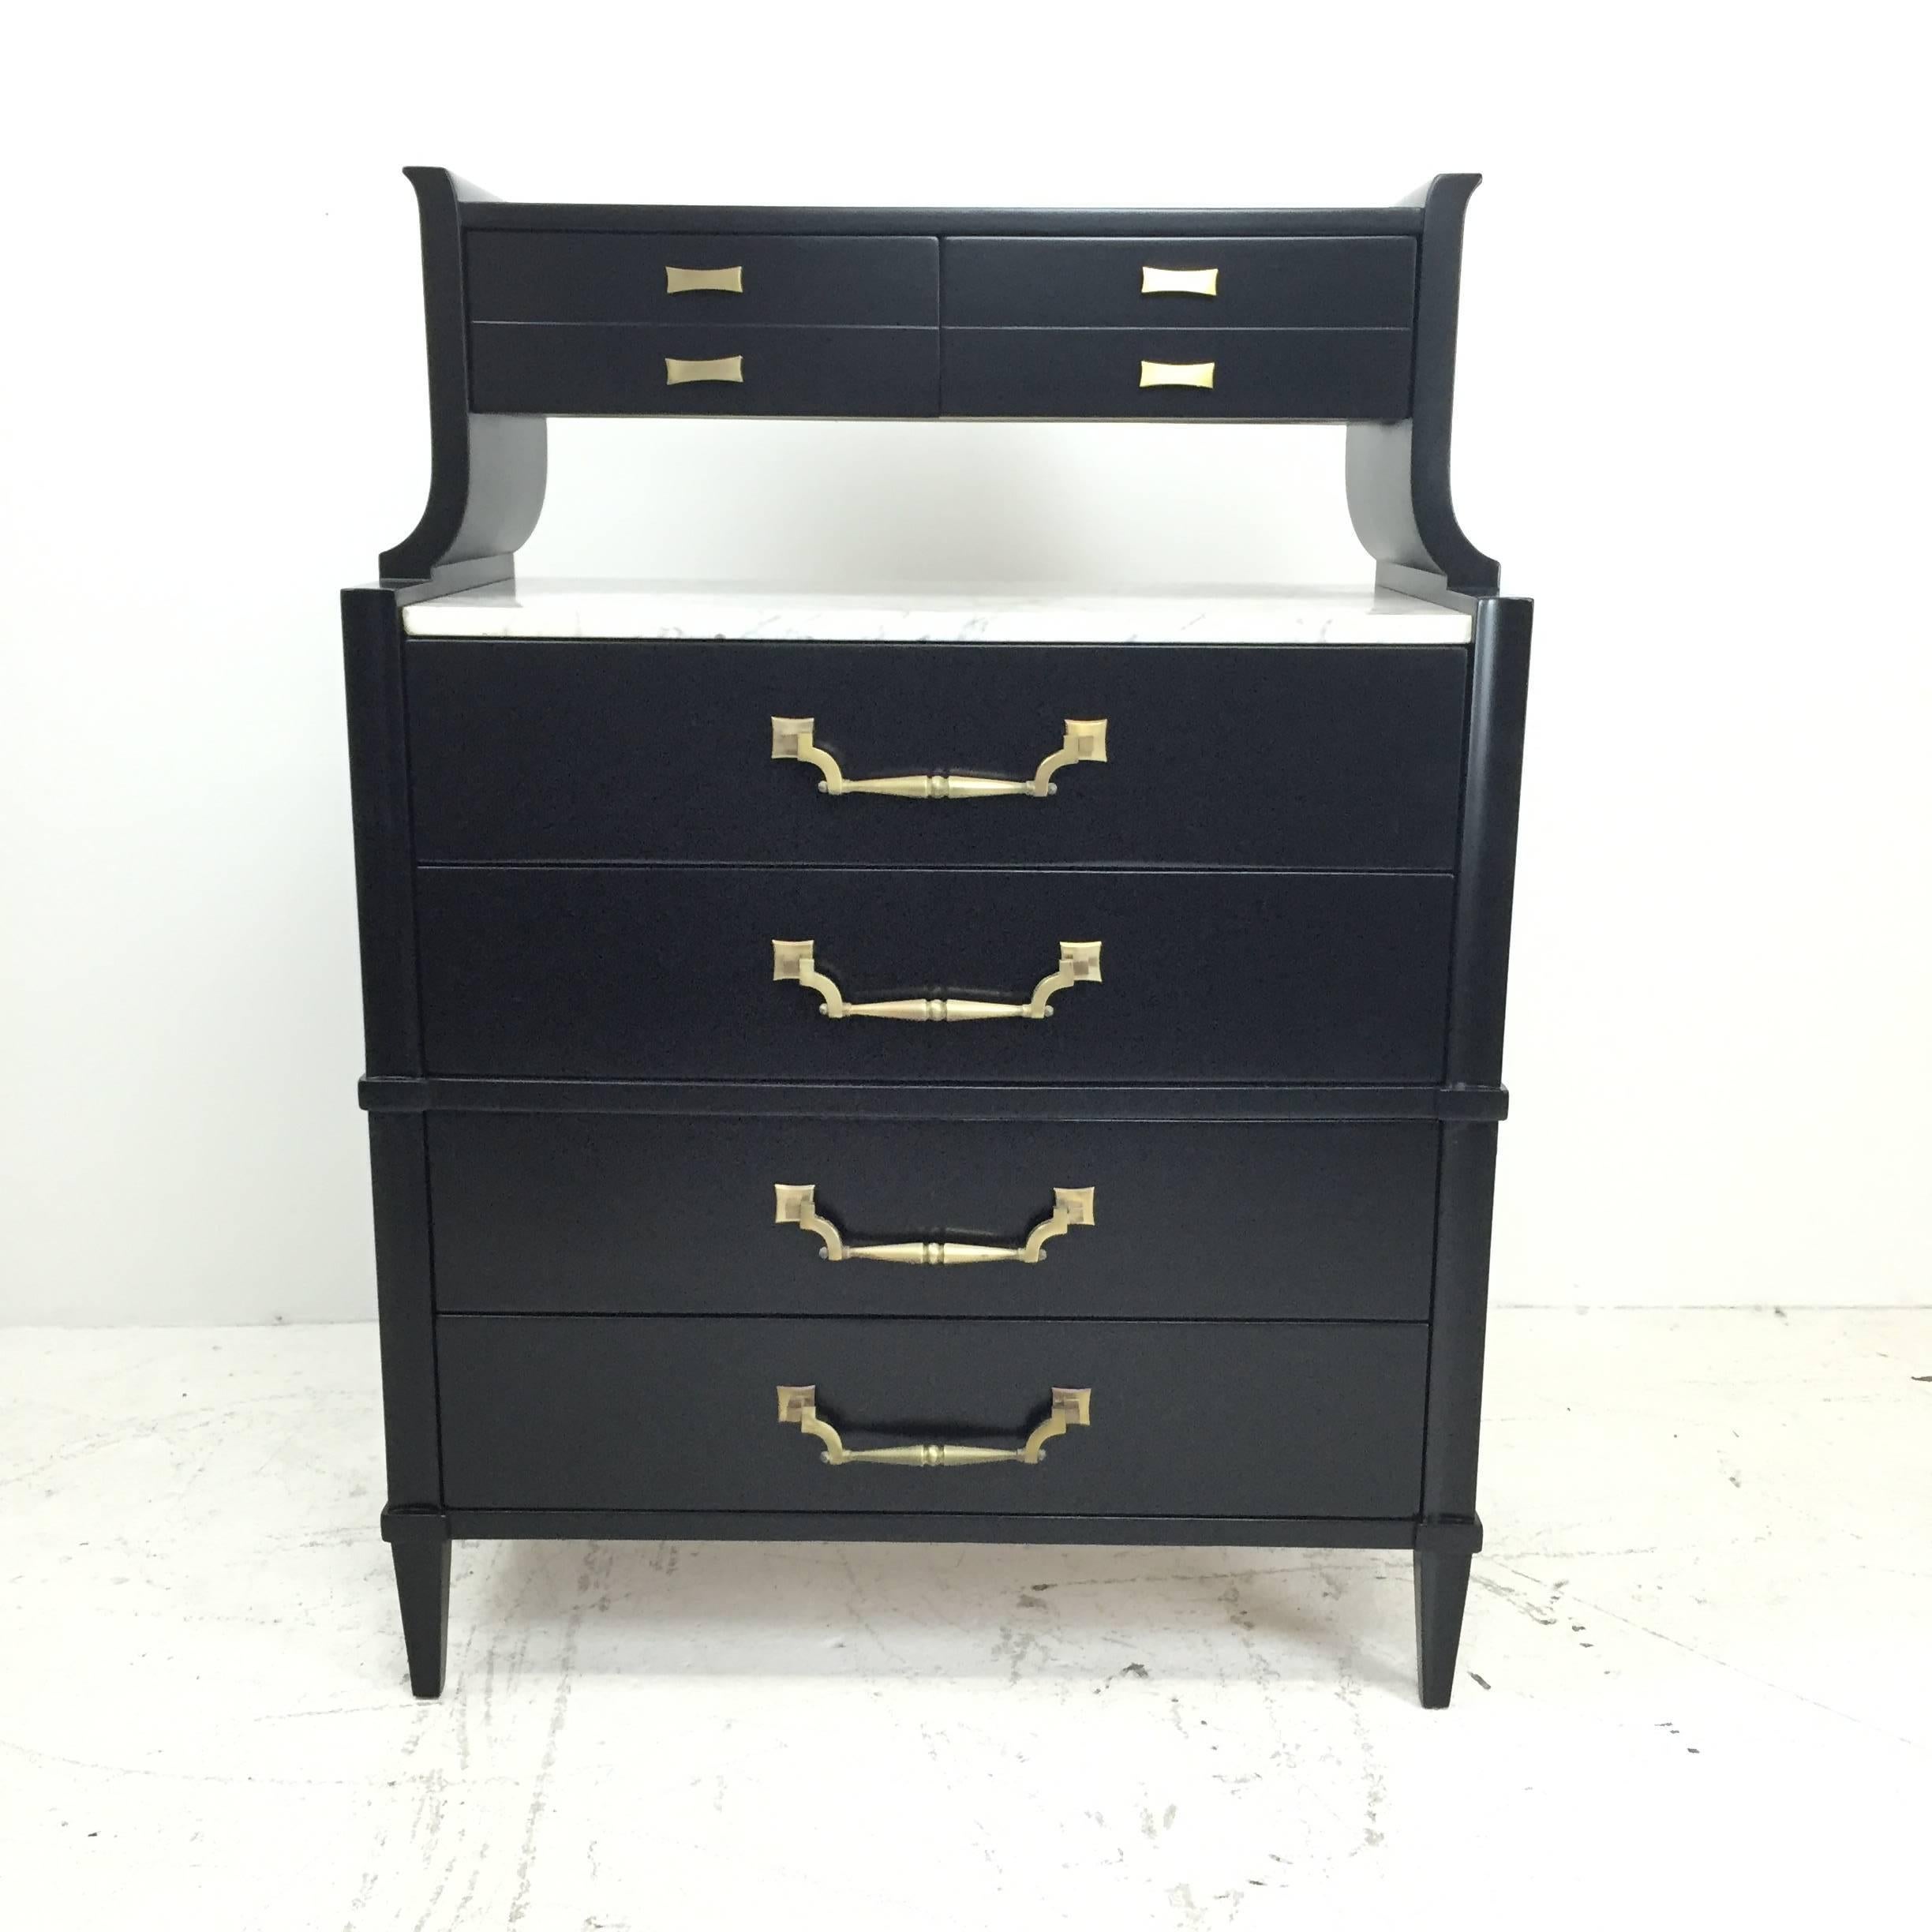 Professionally restored with new black lacquer by our in house lacquer team. The large drawers also allow for generous storage. We offer fast and affordable shipping throughout the United States and internationally.

Dimensions:39